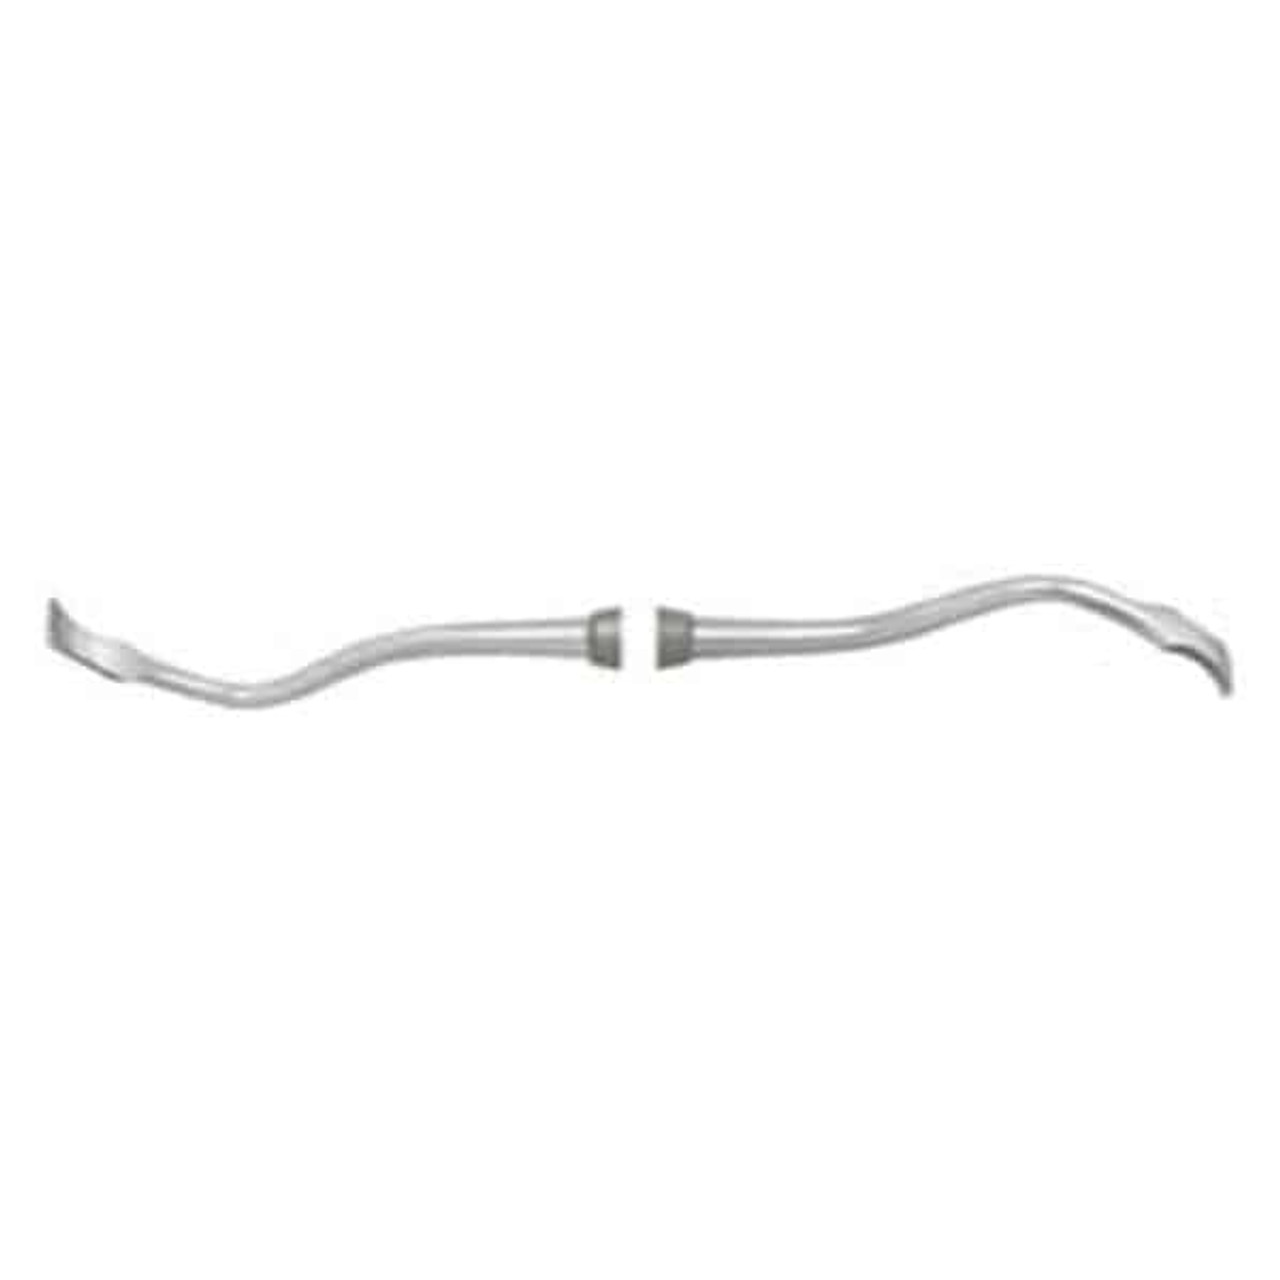 Nordent - Surgical Chisel Rhodes Back Action Double End Stainless Steel